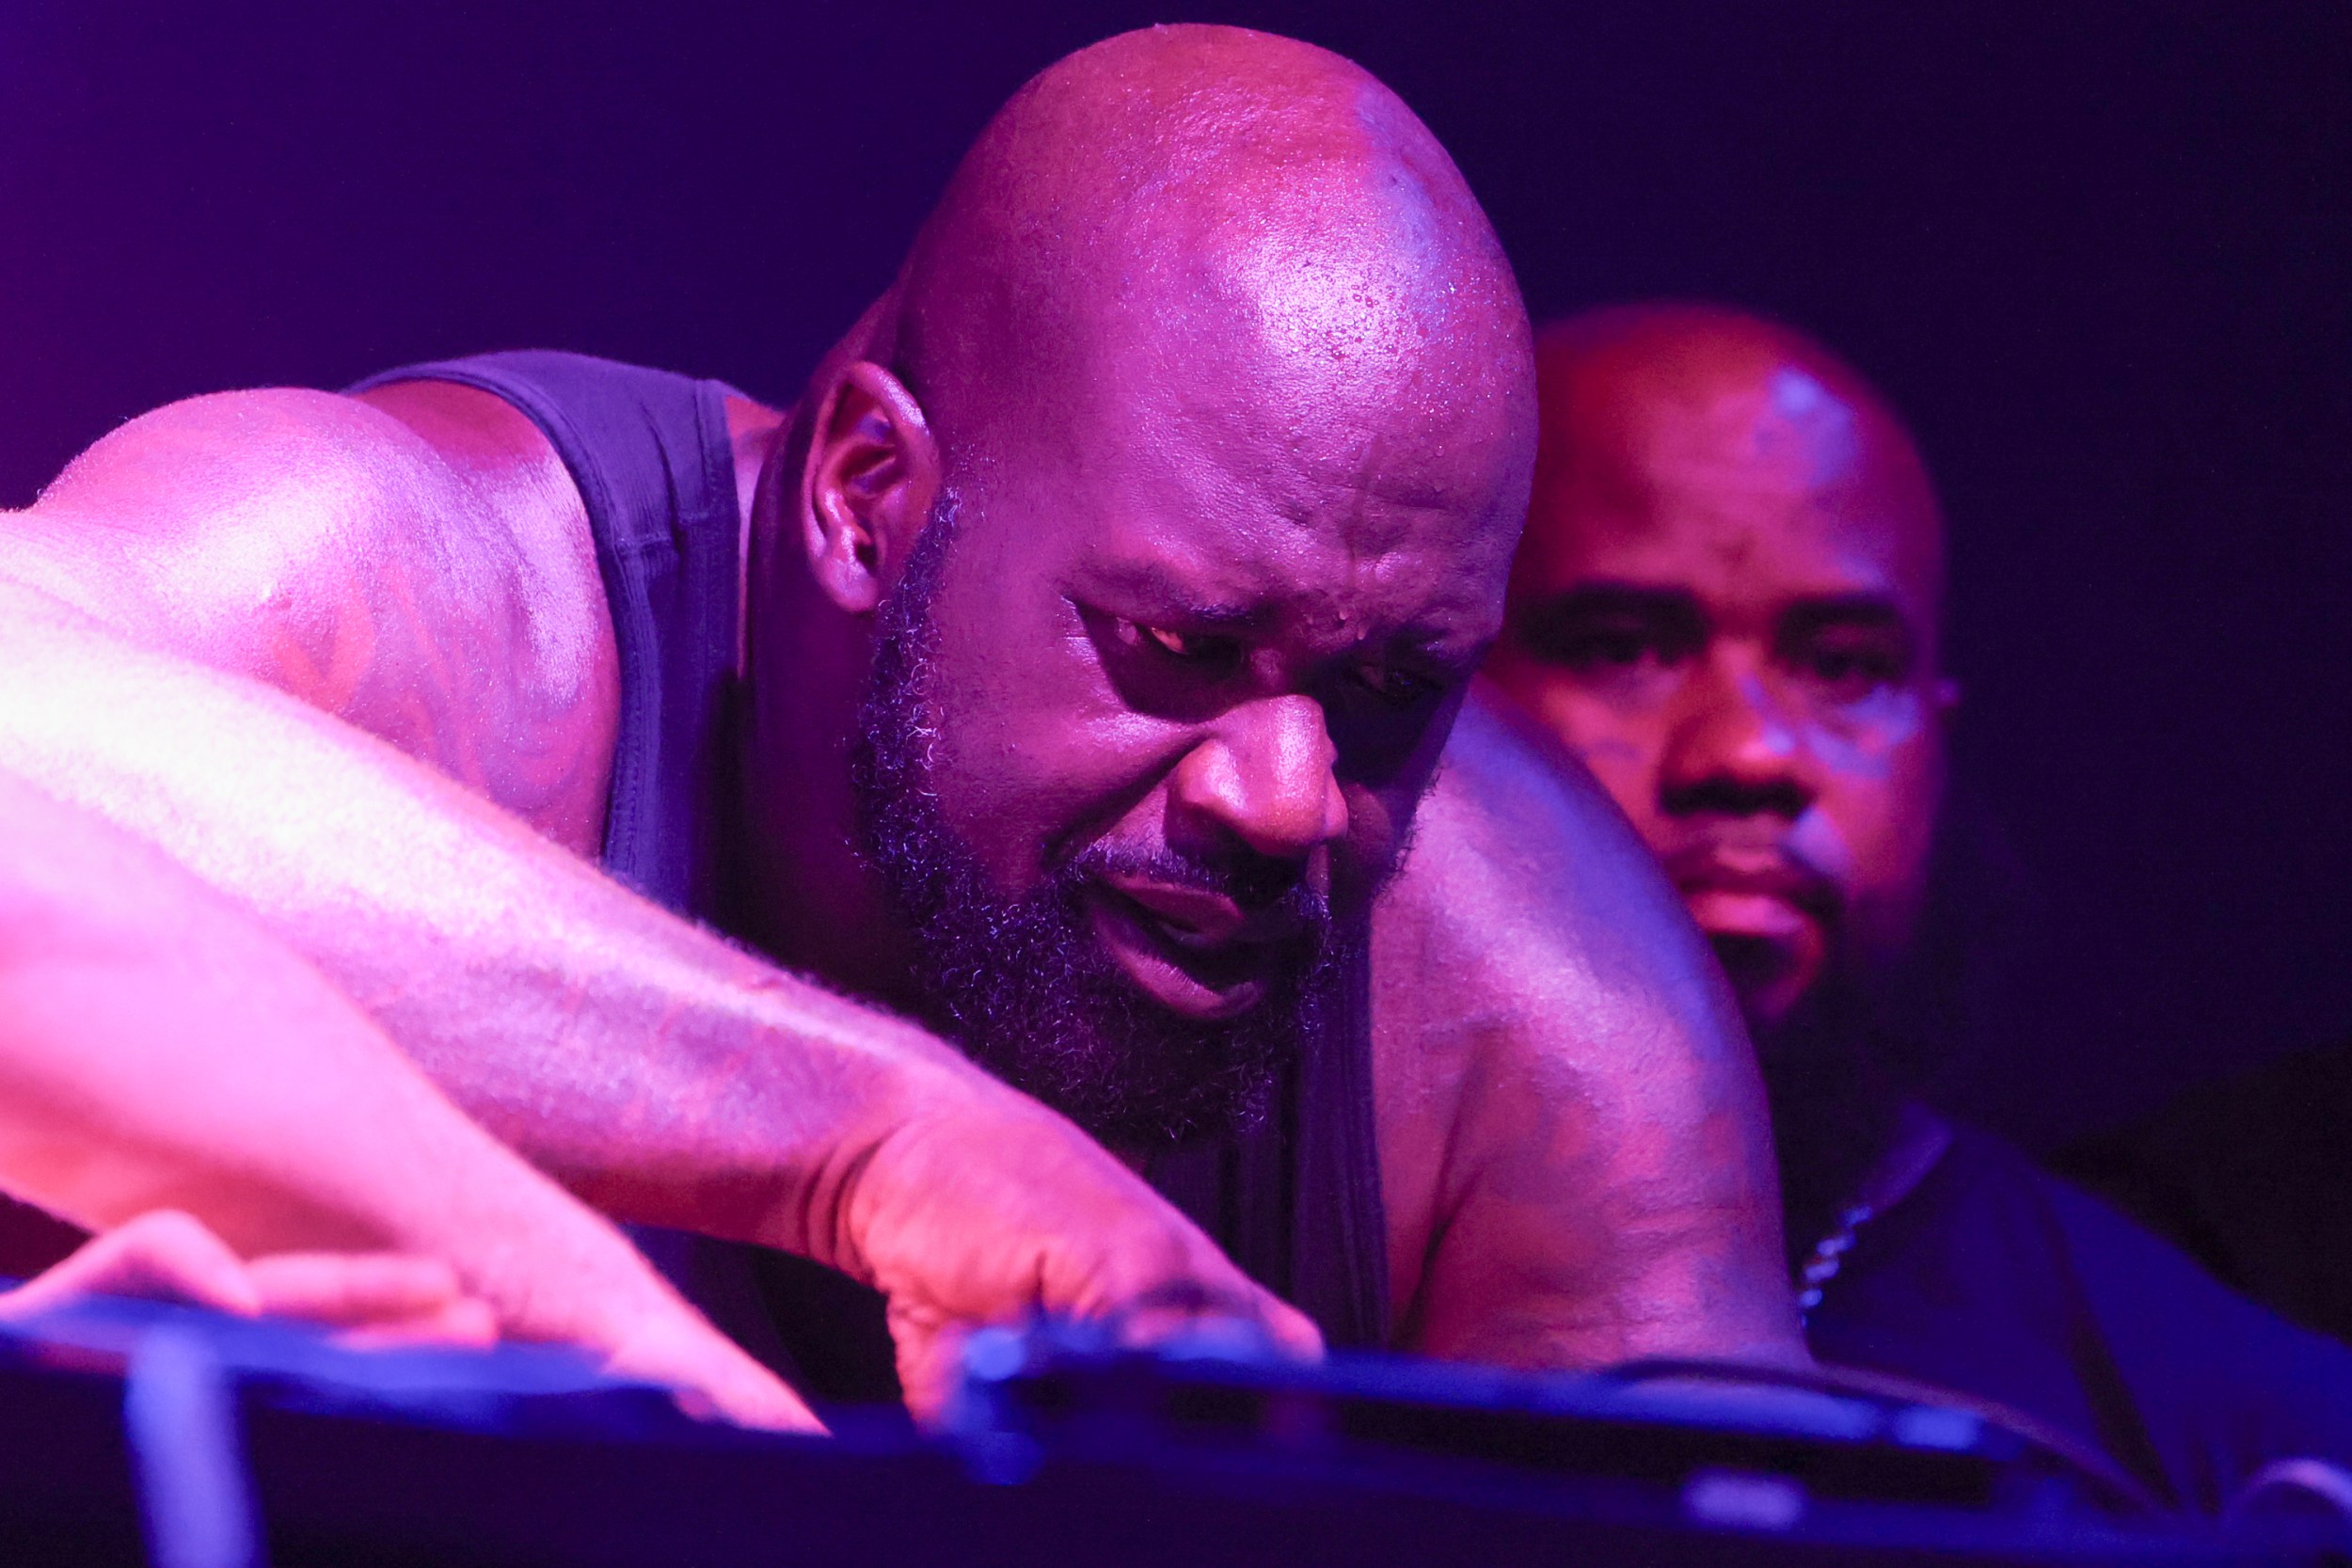 DJ Diesel, aka Shaquille O’Neal, focuses as he performs at 1015 Folsom on Friday.